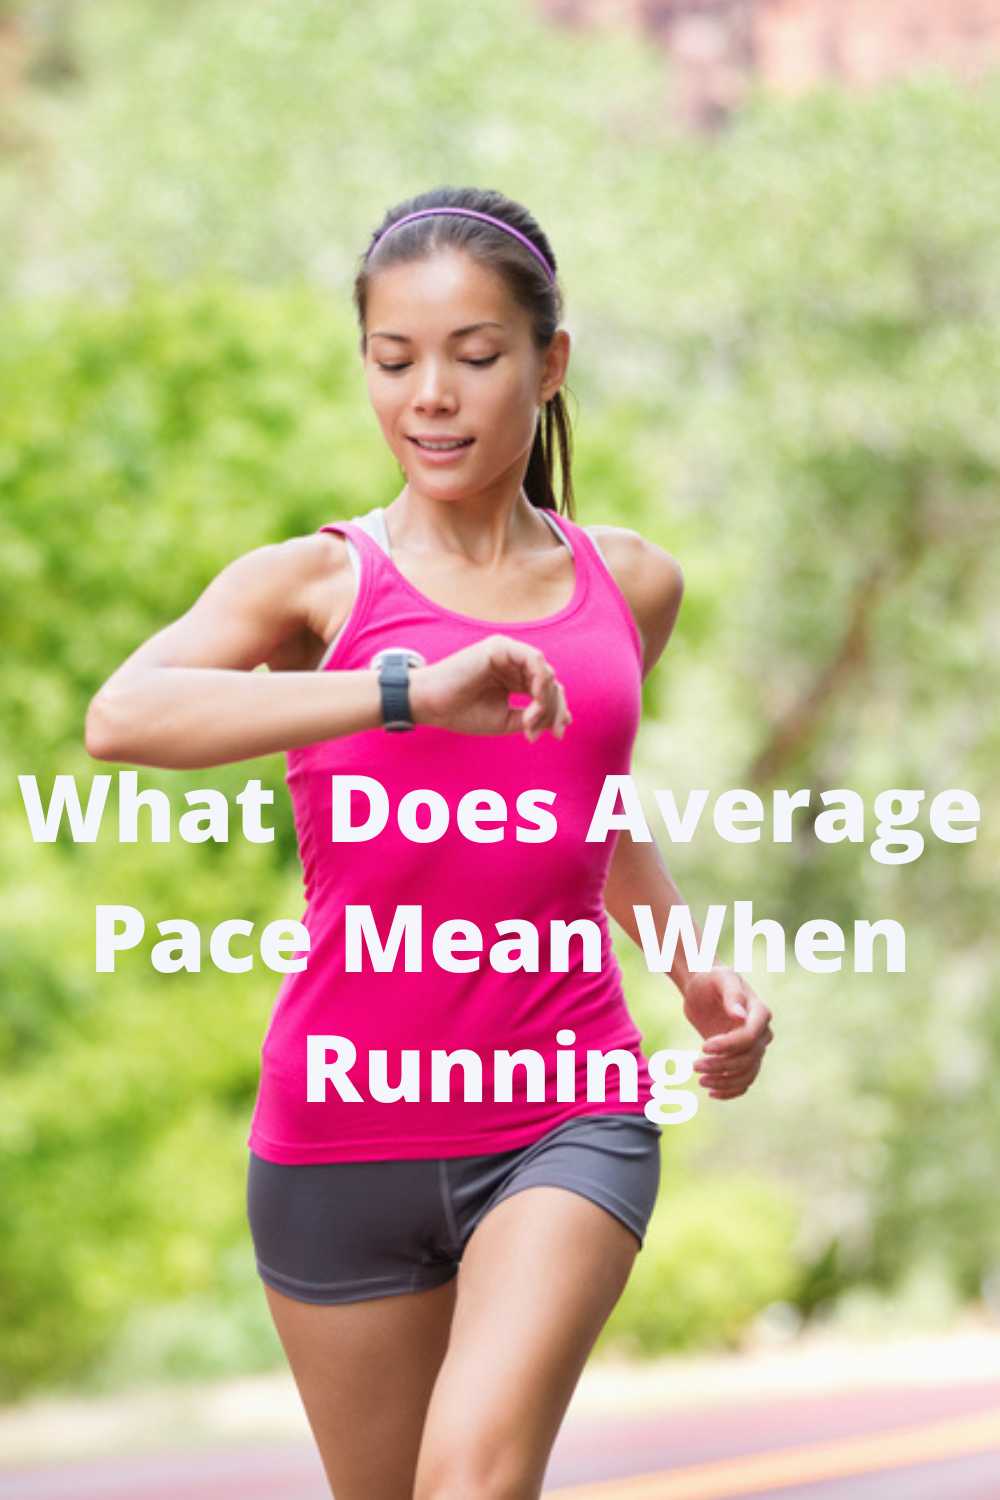 What does average pace mean when running